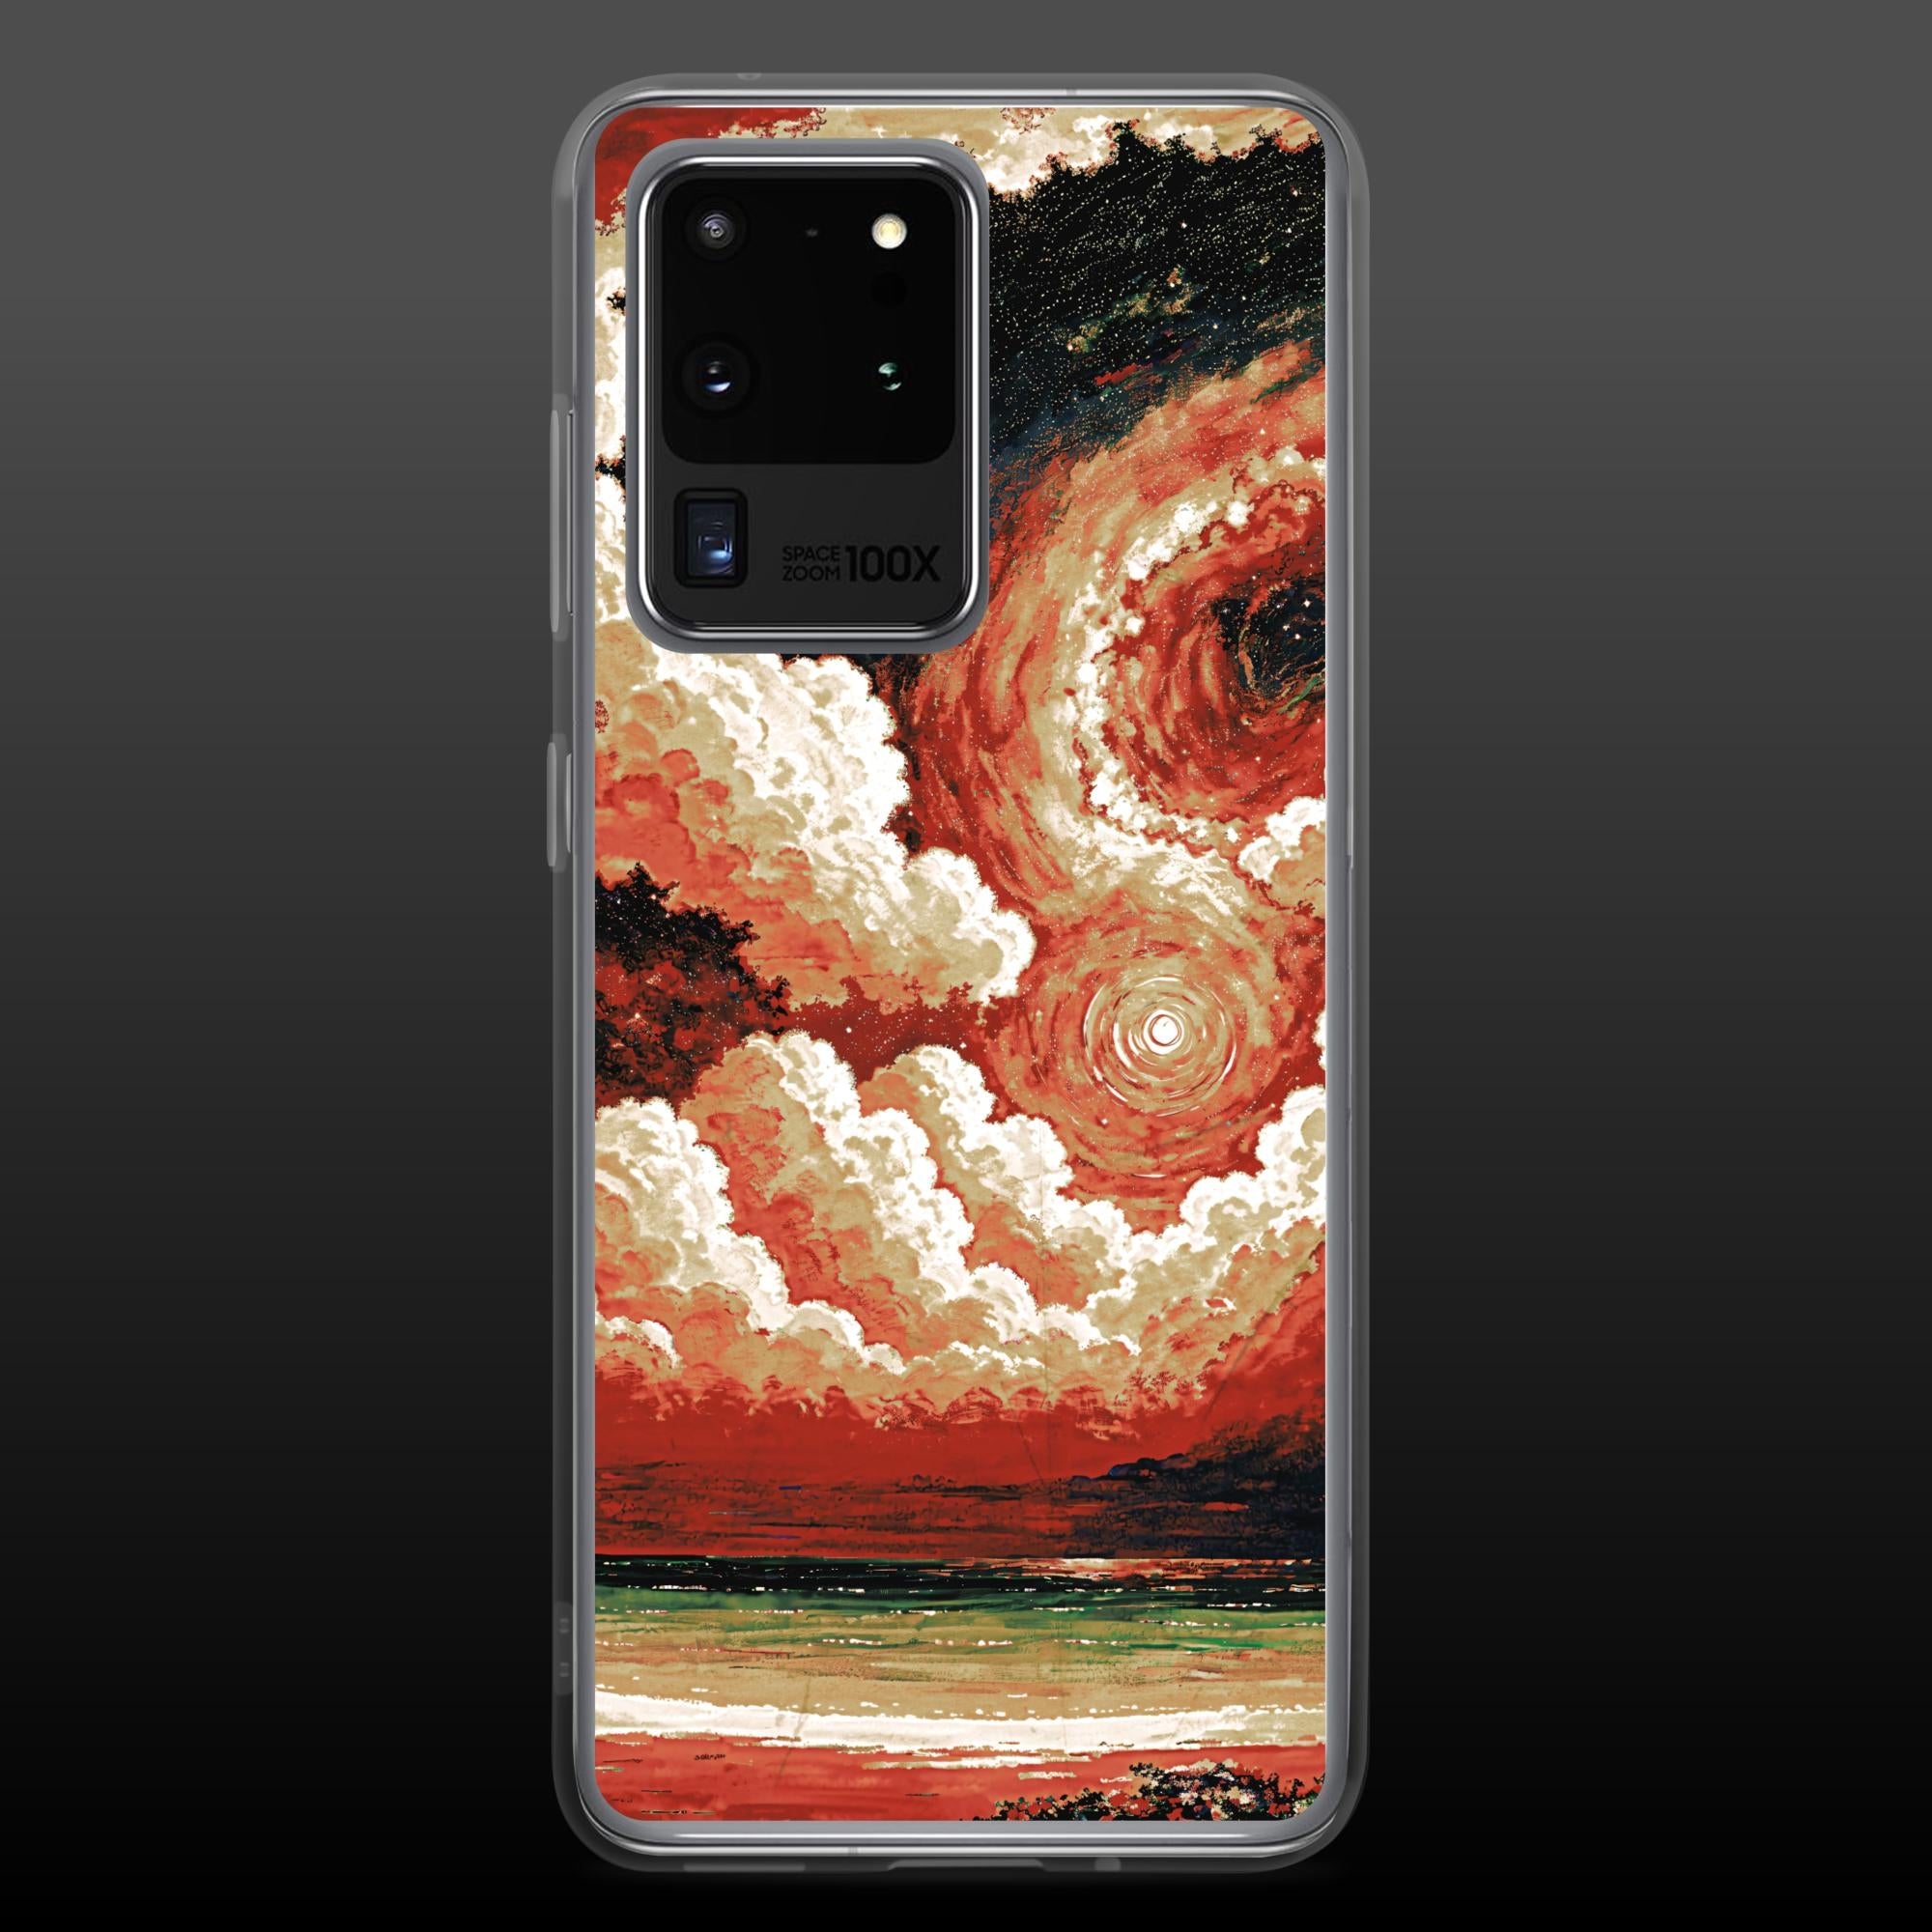 "Sinister vortex" clear samsung case - Clear samsung case - Ever colorful